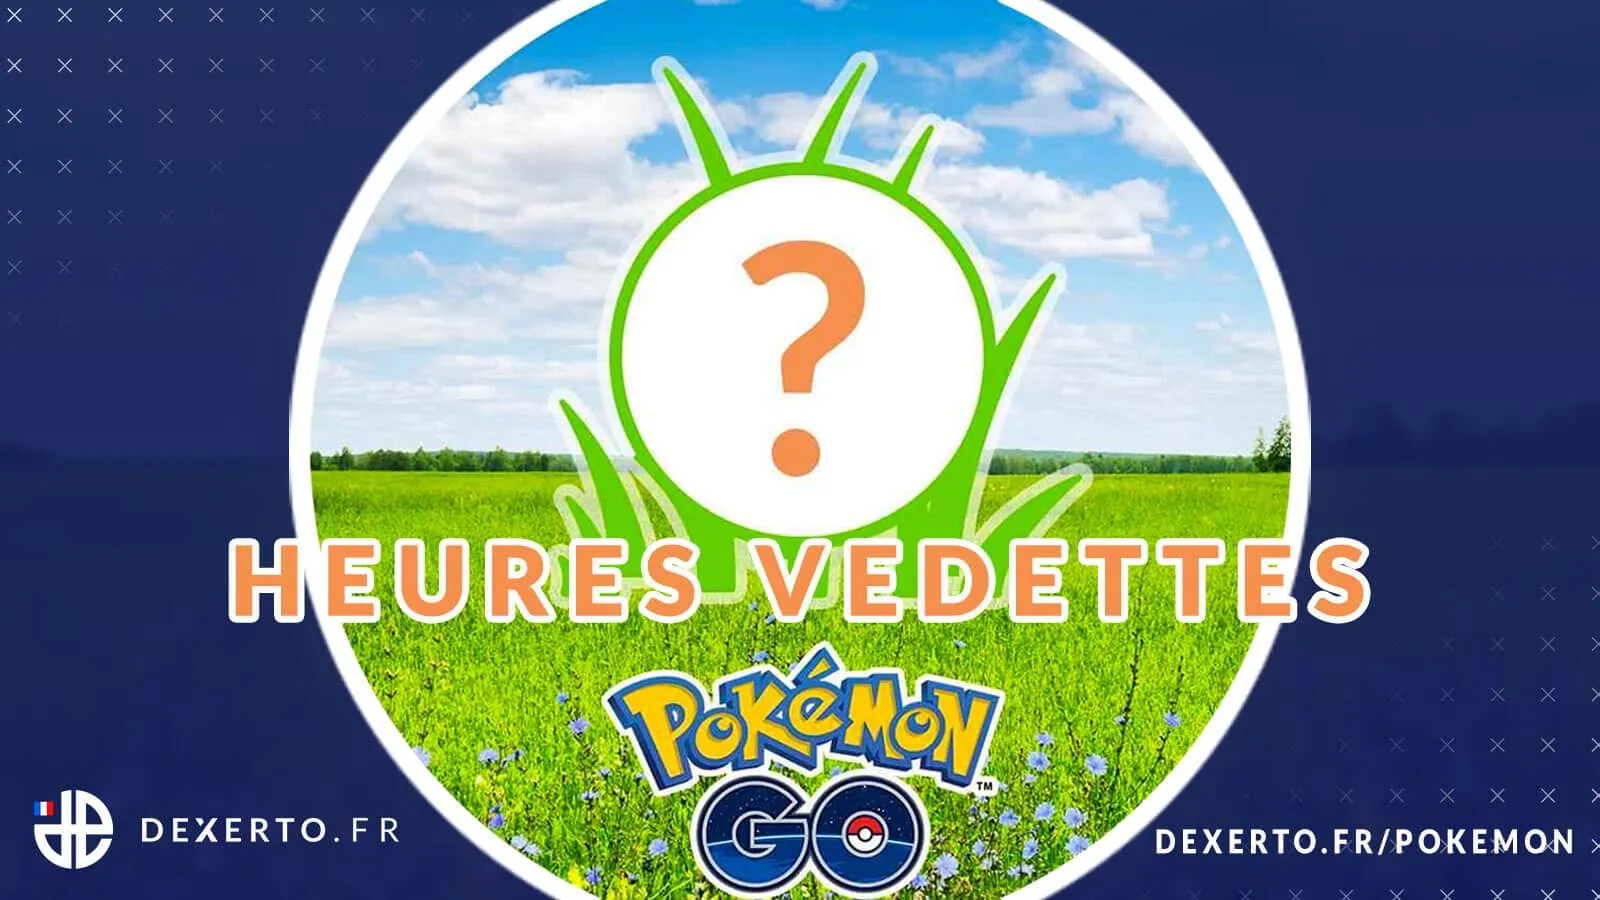 Pokémon Go Everything you need to know about the Adventure Effects of